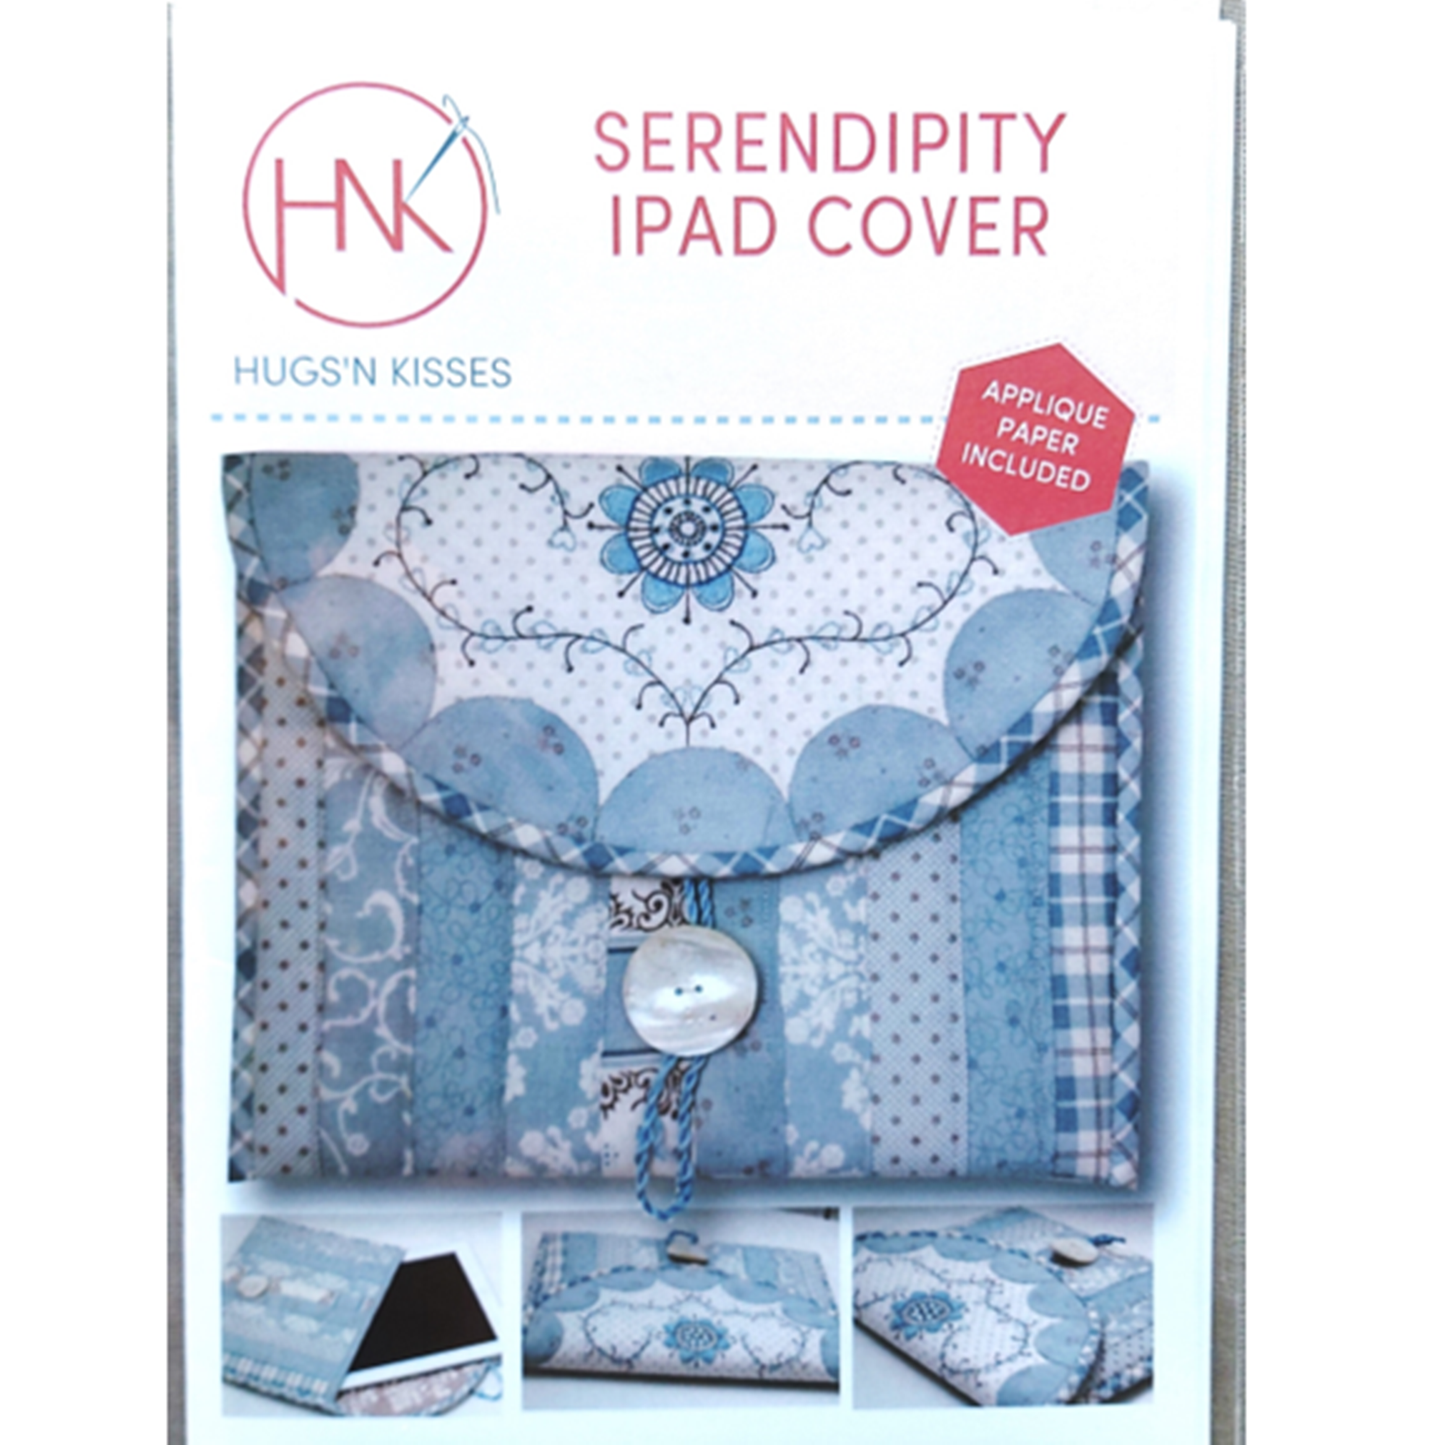 Serendipity IPad cover applique embroidery Hugs 'N Kisses pattern